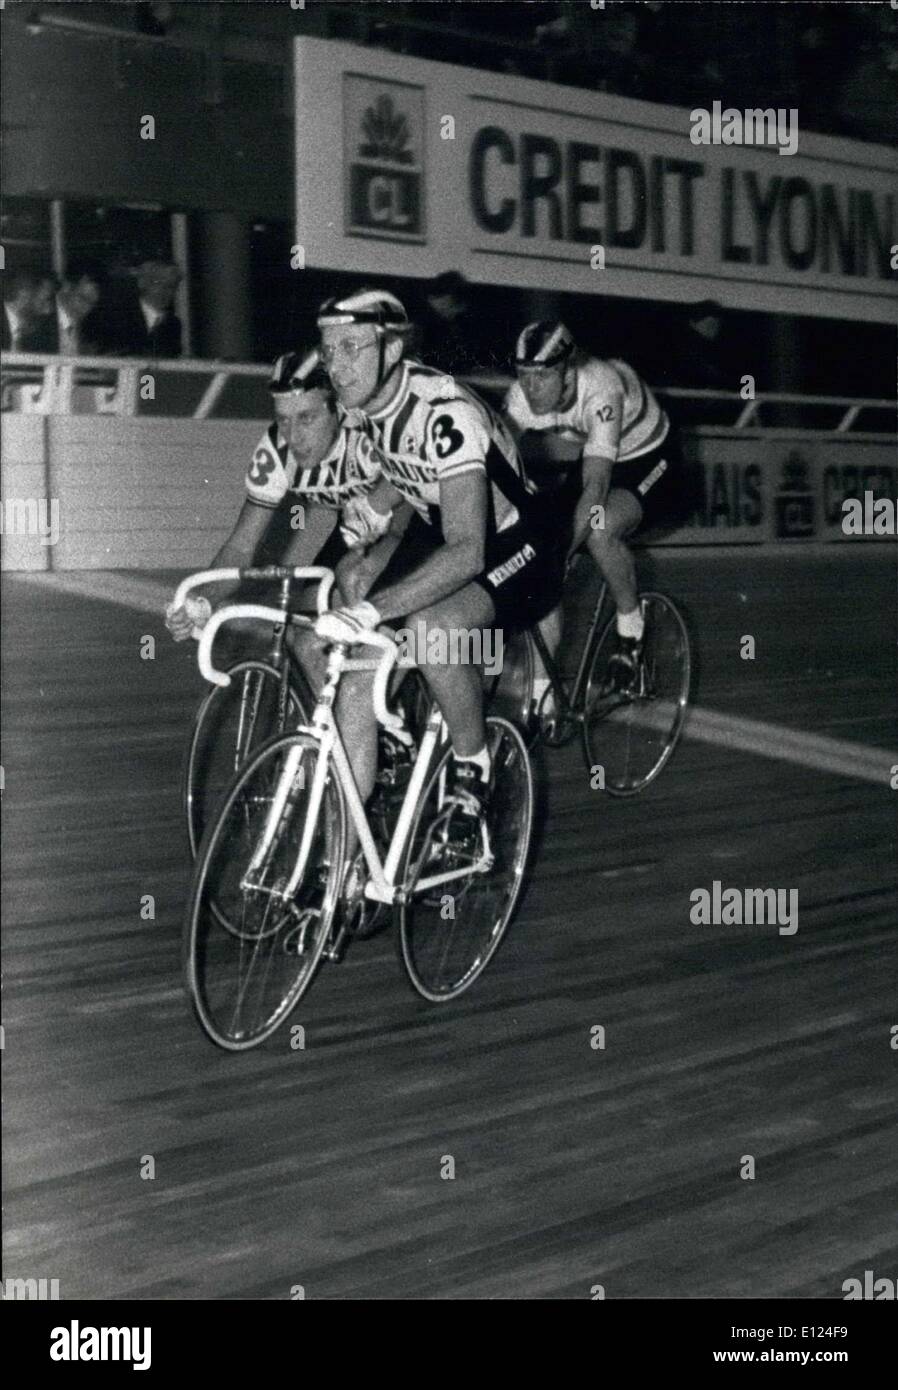 Nov. 15, 1984 - Laurent Fignon and Charly Mottet racing in the relay. Stock Photo